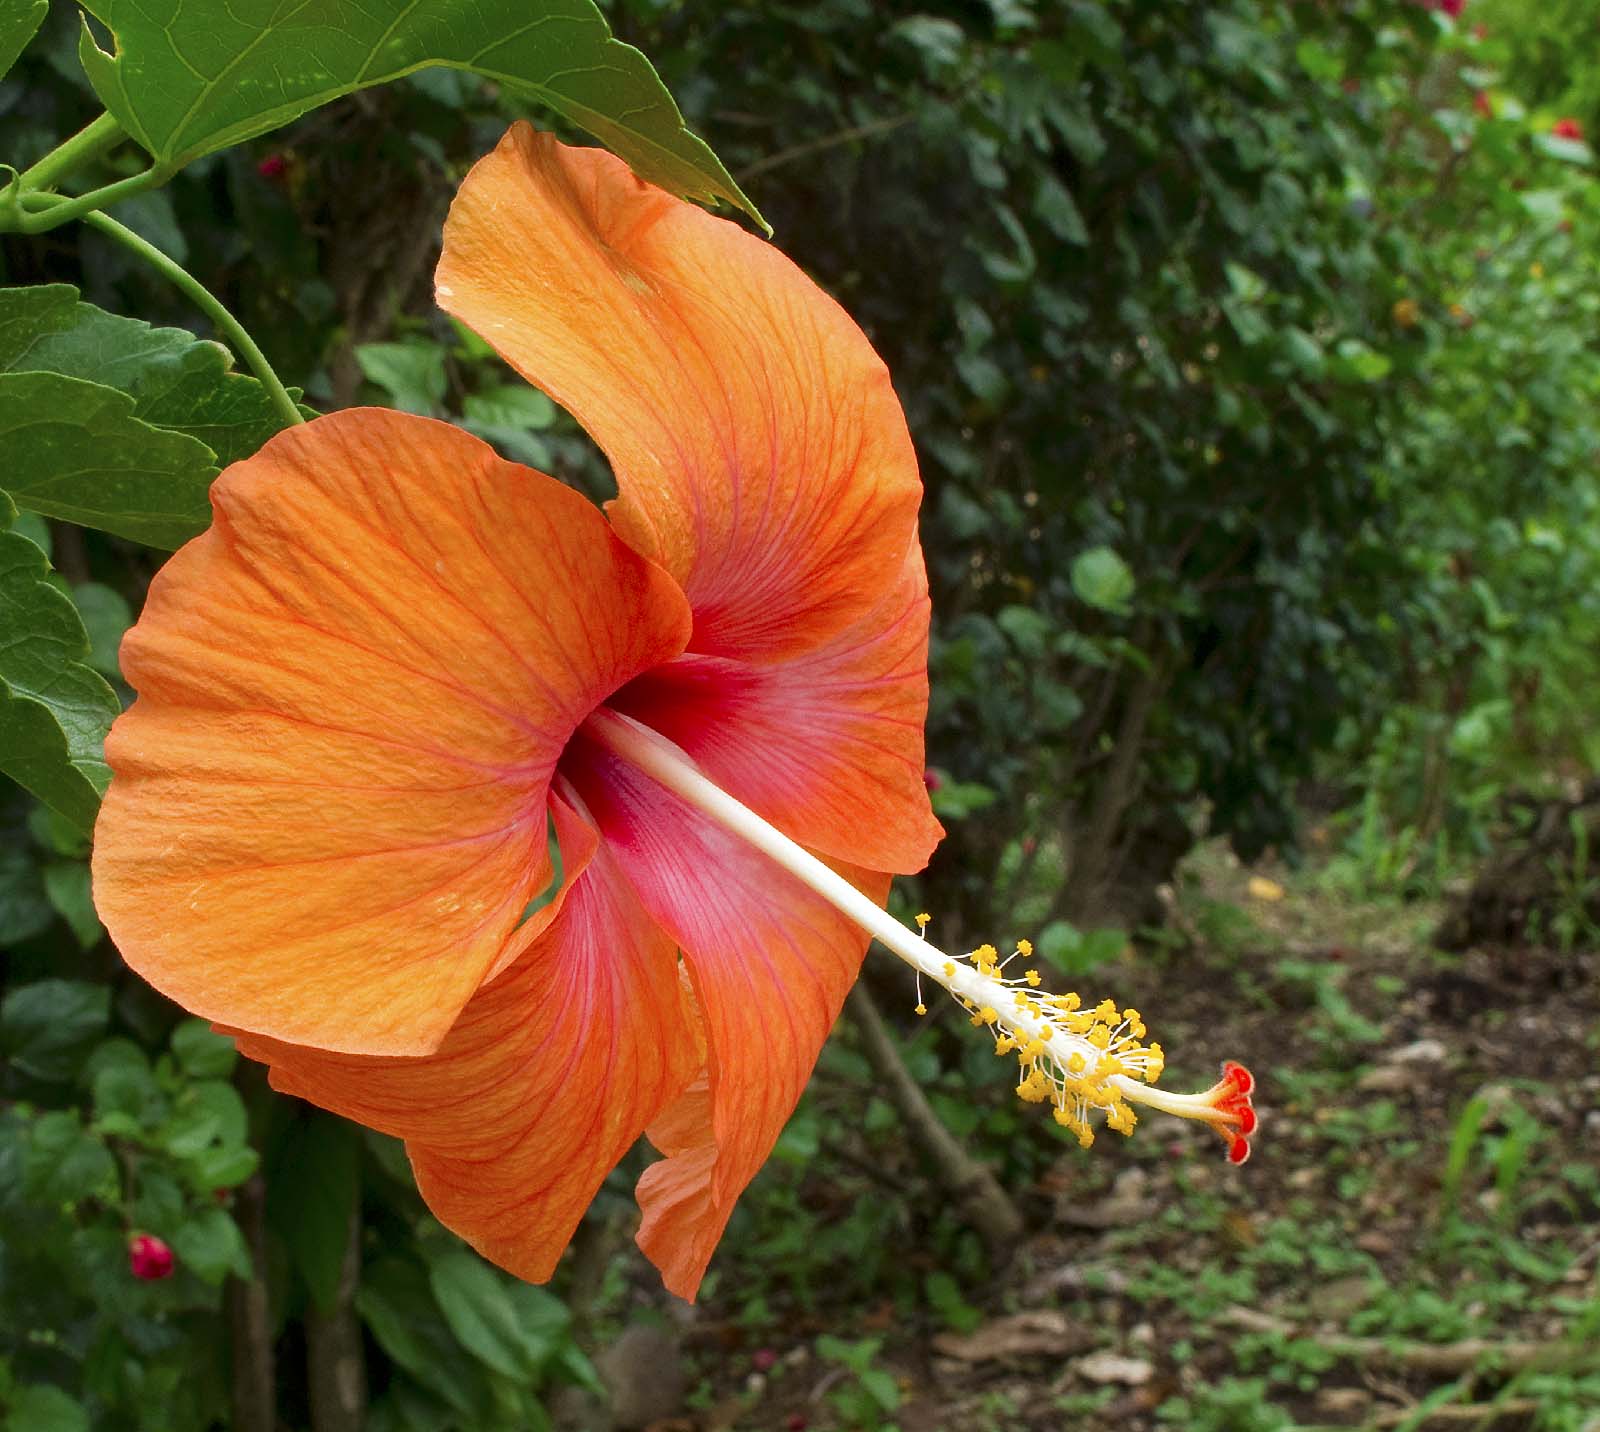 Madang – Ples Bilong Mi » Blog Archive » Kristy and the Hibiscus